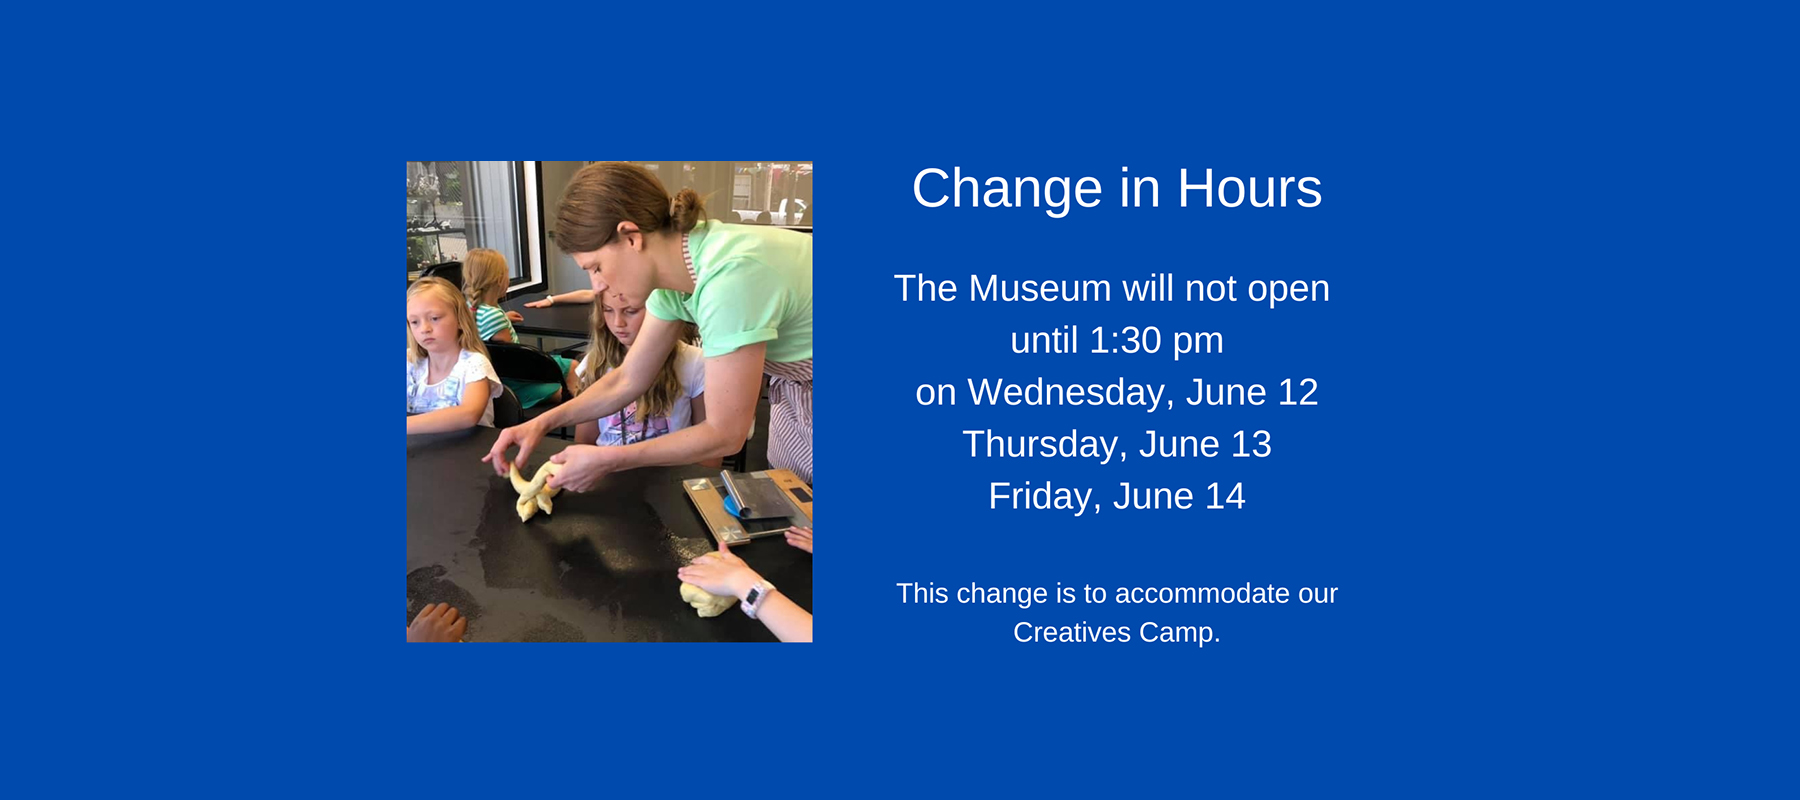 The museum will not open until 1:30 p.m. on Wednesday, June 12th; Thursday, June 13th; and Friday, June 14th. This change is to accommodate our Creatives Camp.